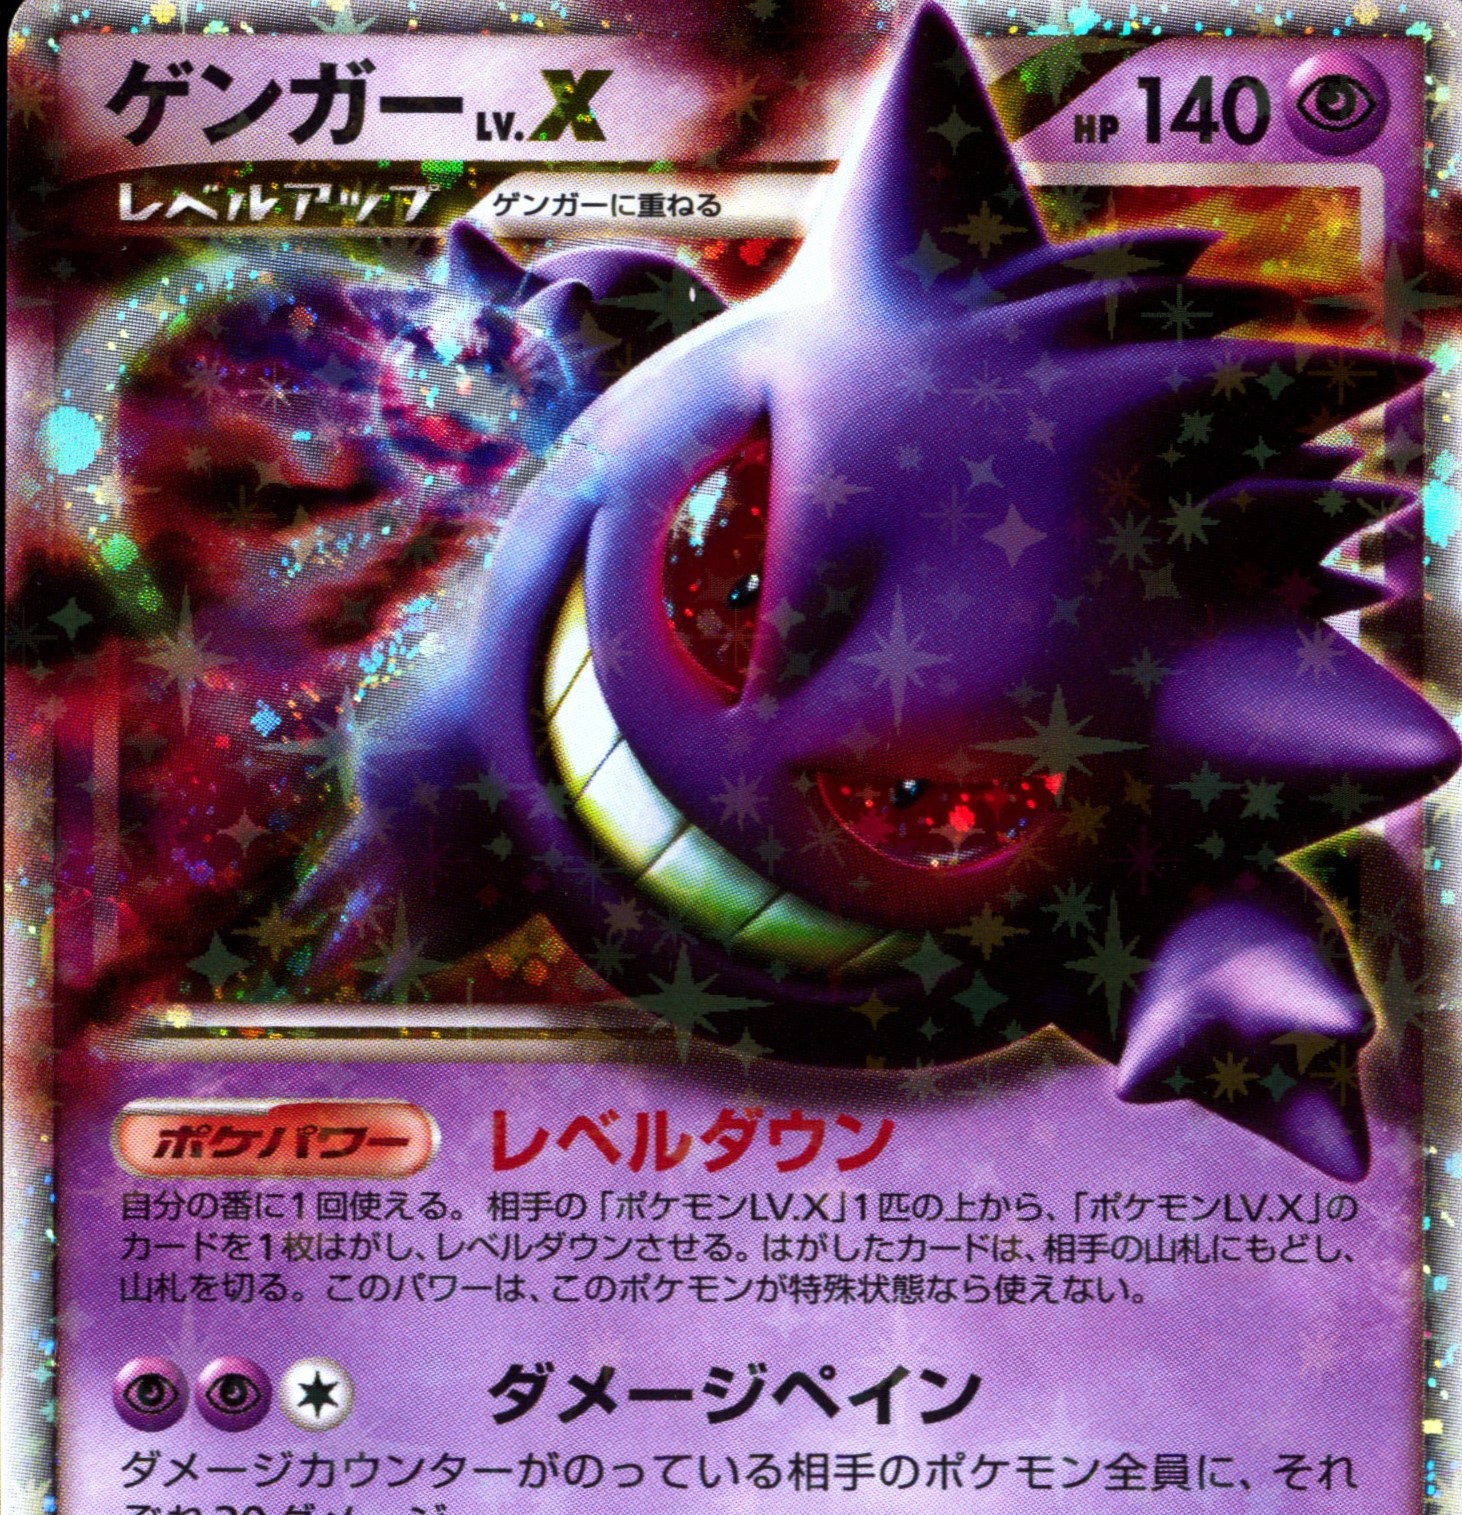 Auction Item 192106385938 TCG Cards 2009 Pokemon Japanese Mewtwo LV.X  Collection Pack